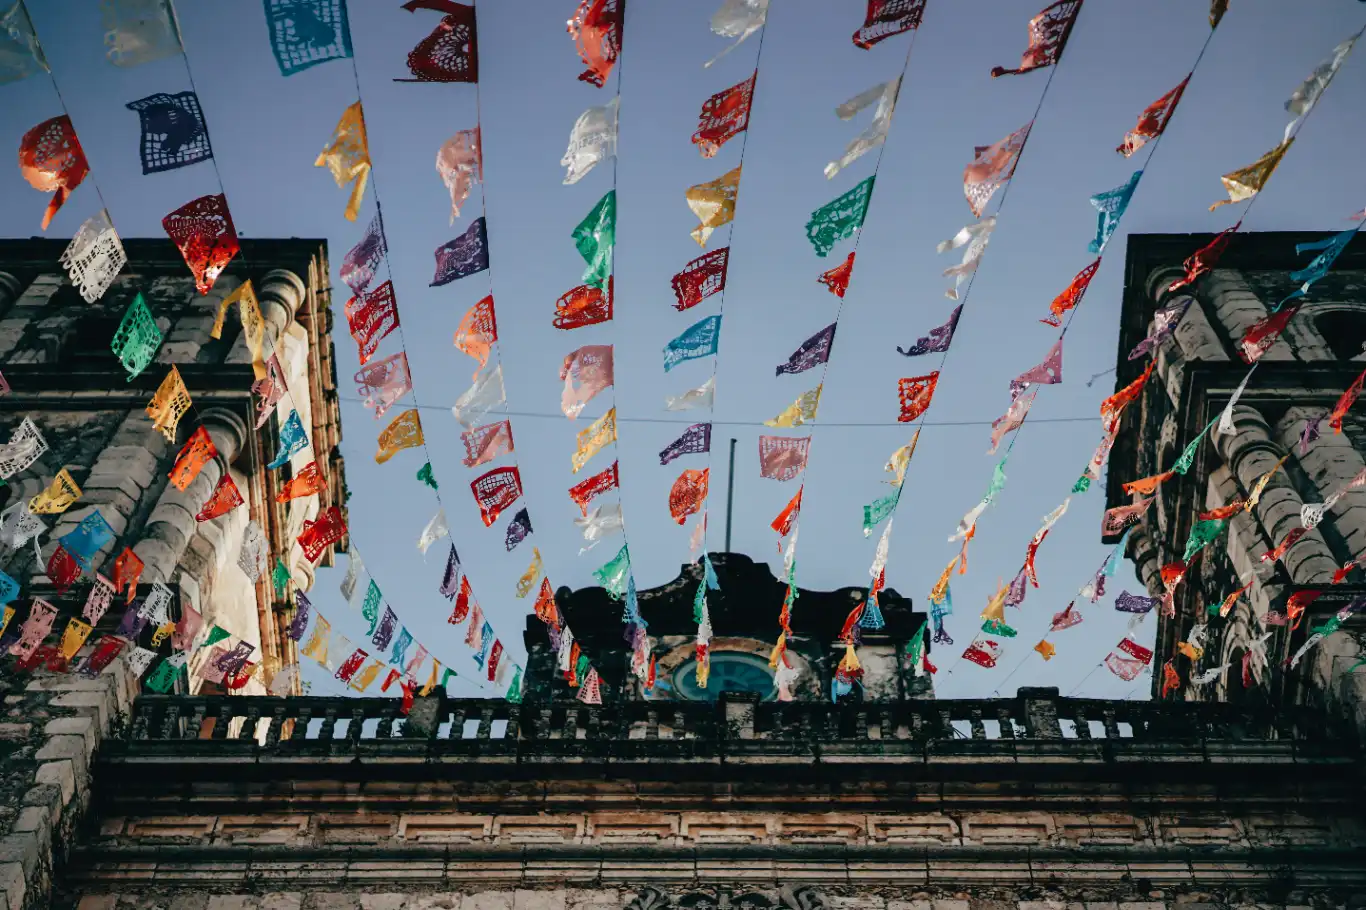 Colorful papel picado streamers fluttering in the breeze above a historical building's façade under a clear blue sky.